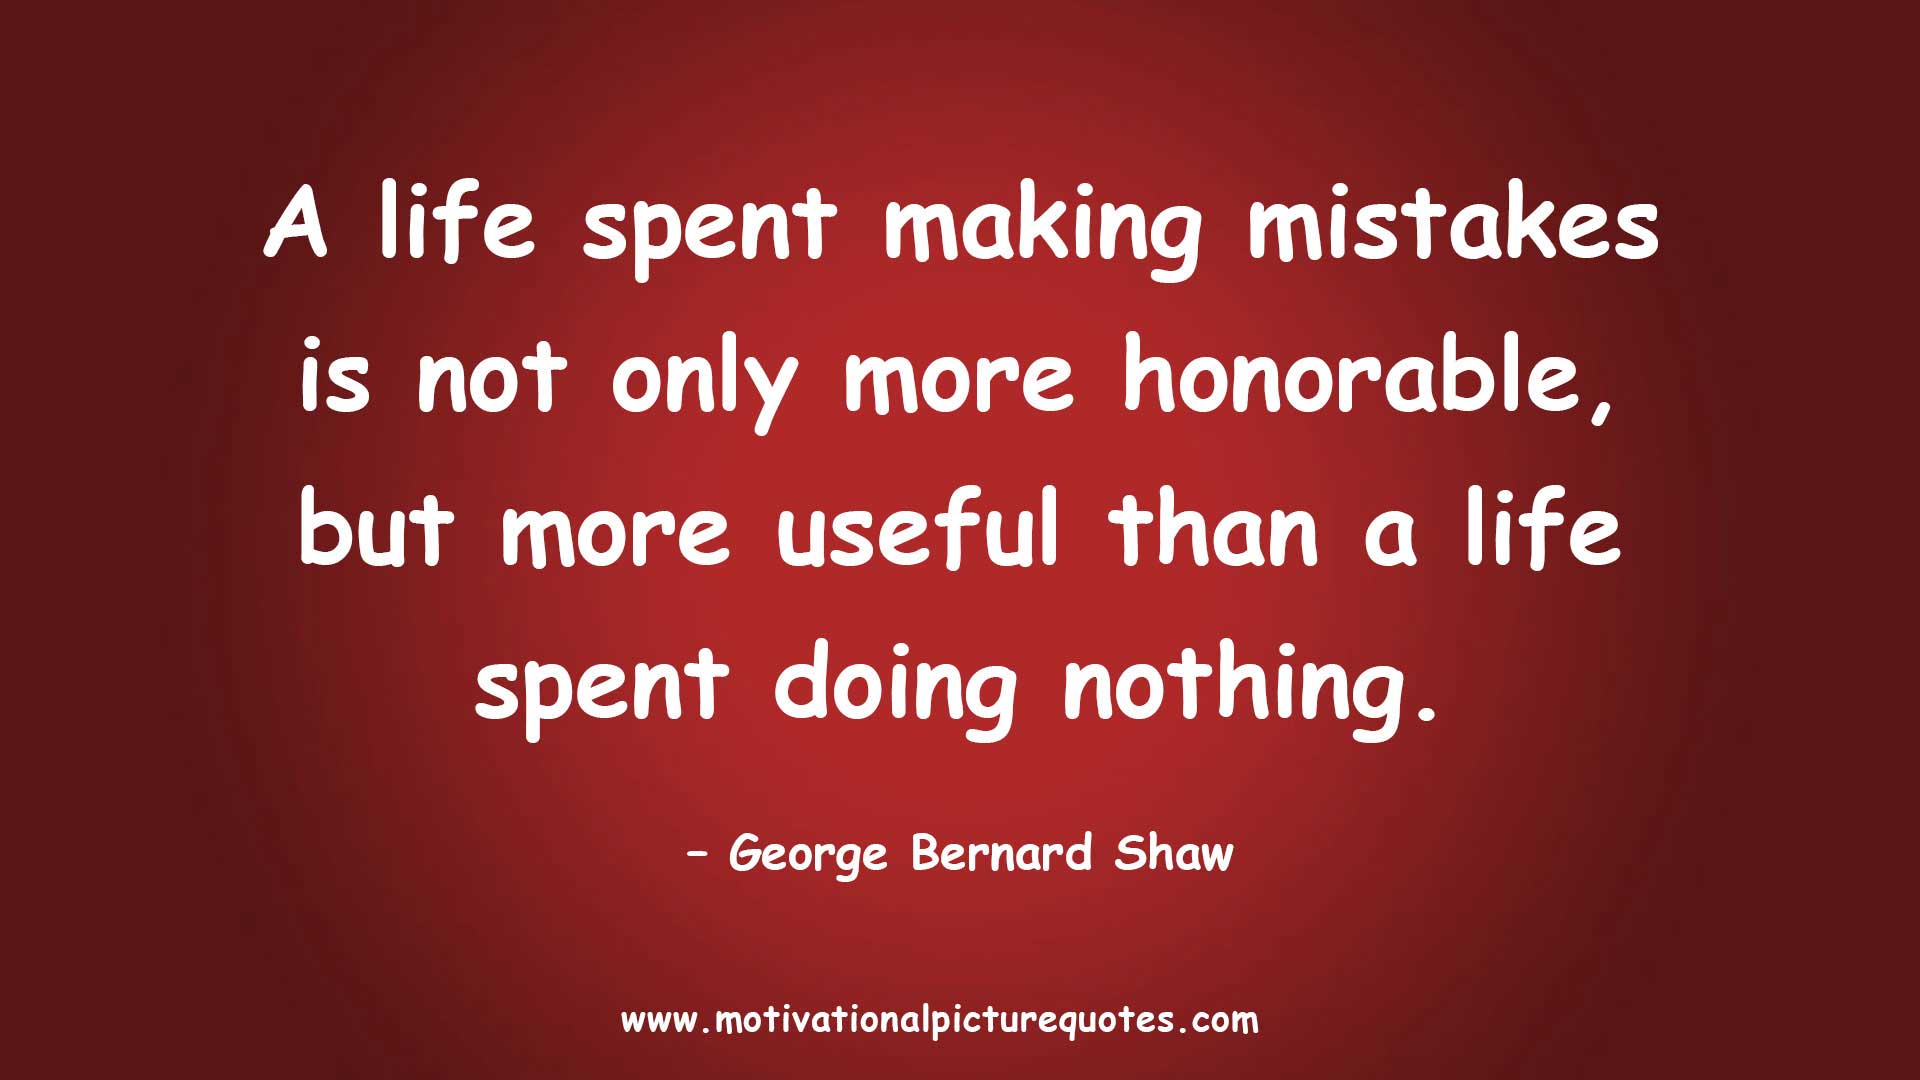 Sayings about mistakes. A Life spent making mistakes is not only more Honorable, but more useful than a Life spent doing nothing.. Mistakes Motivation. Motivation sayings about mistakes. Spending my life